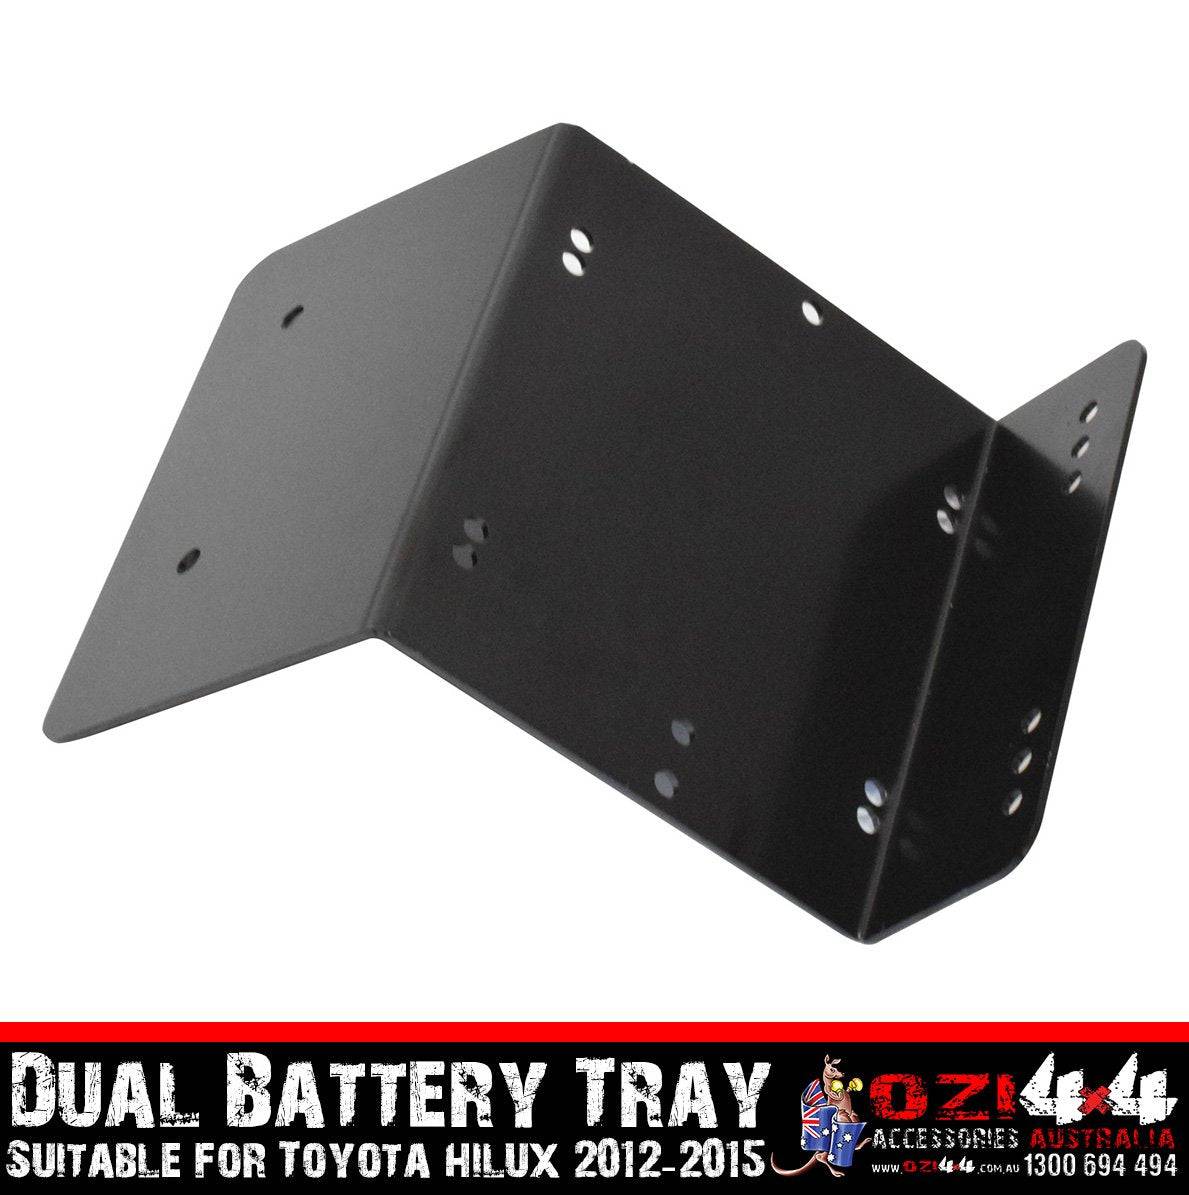 Black Dual Battery Tray Suits Toyota Hilux 2012-2015 (Online Only)